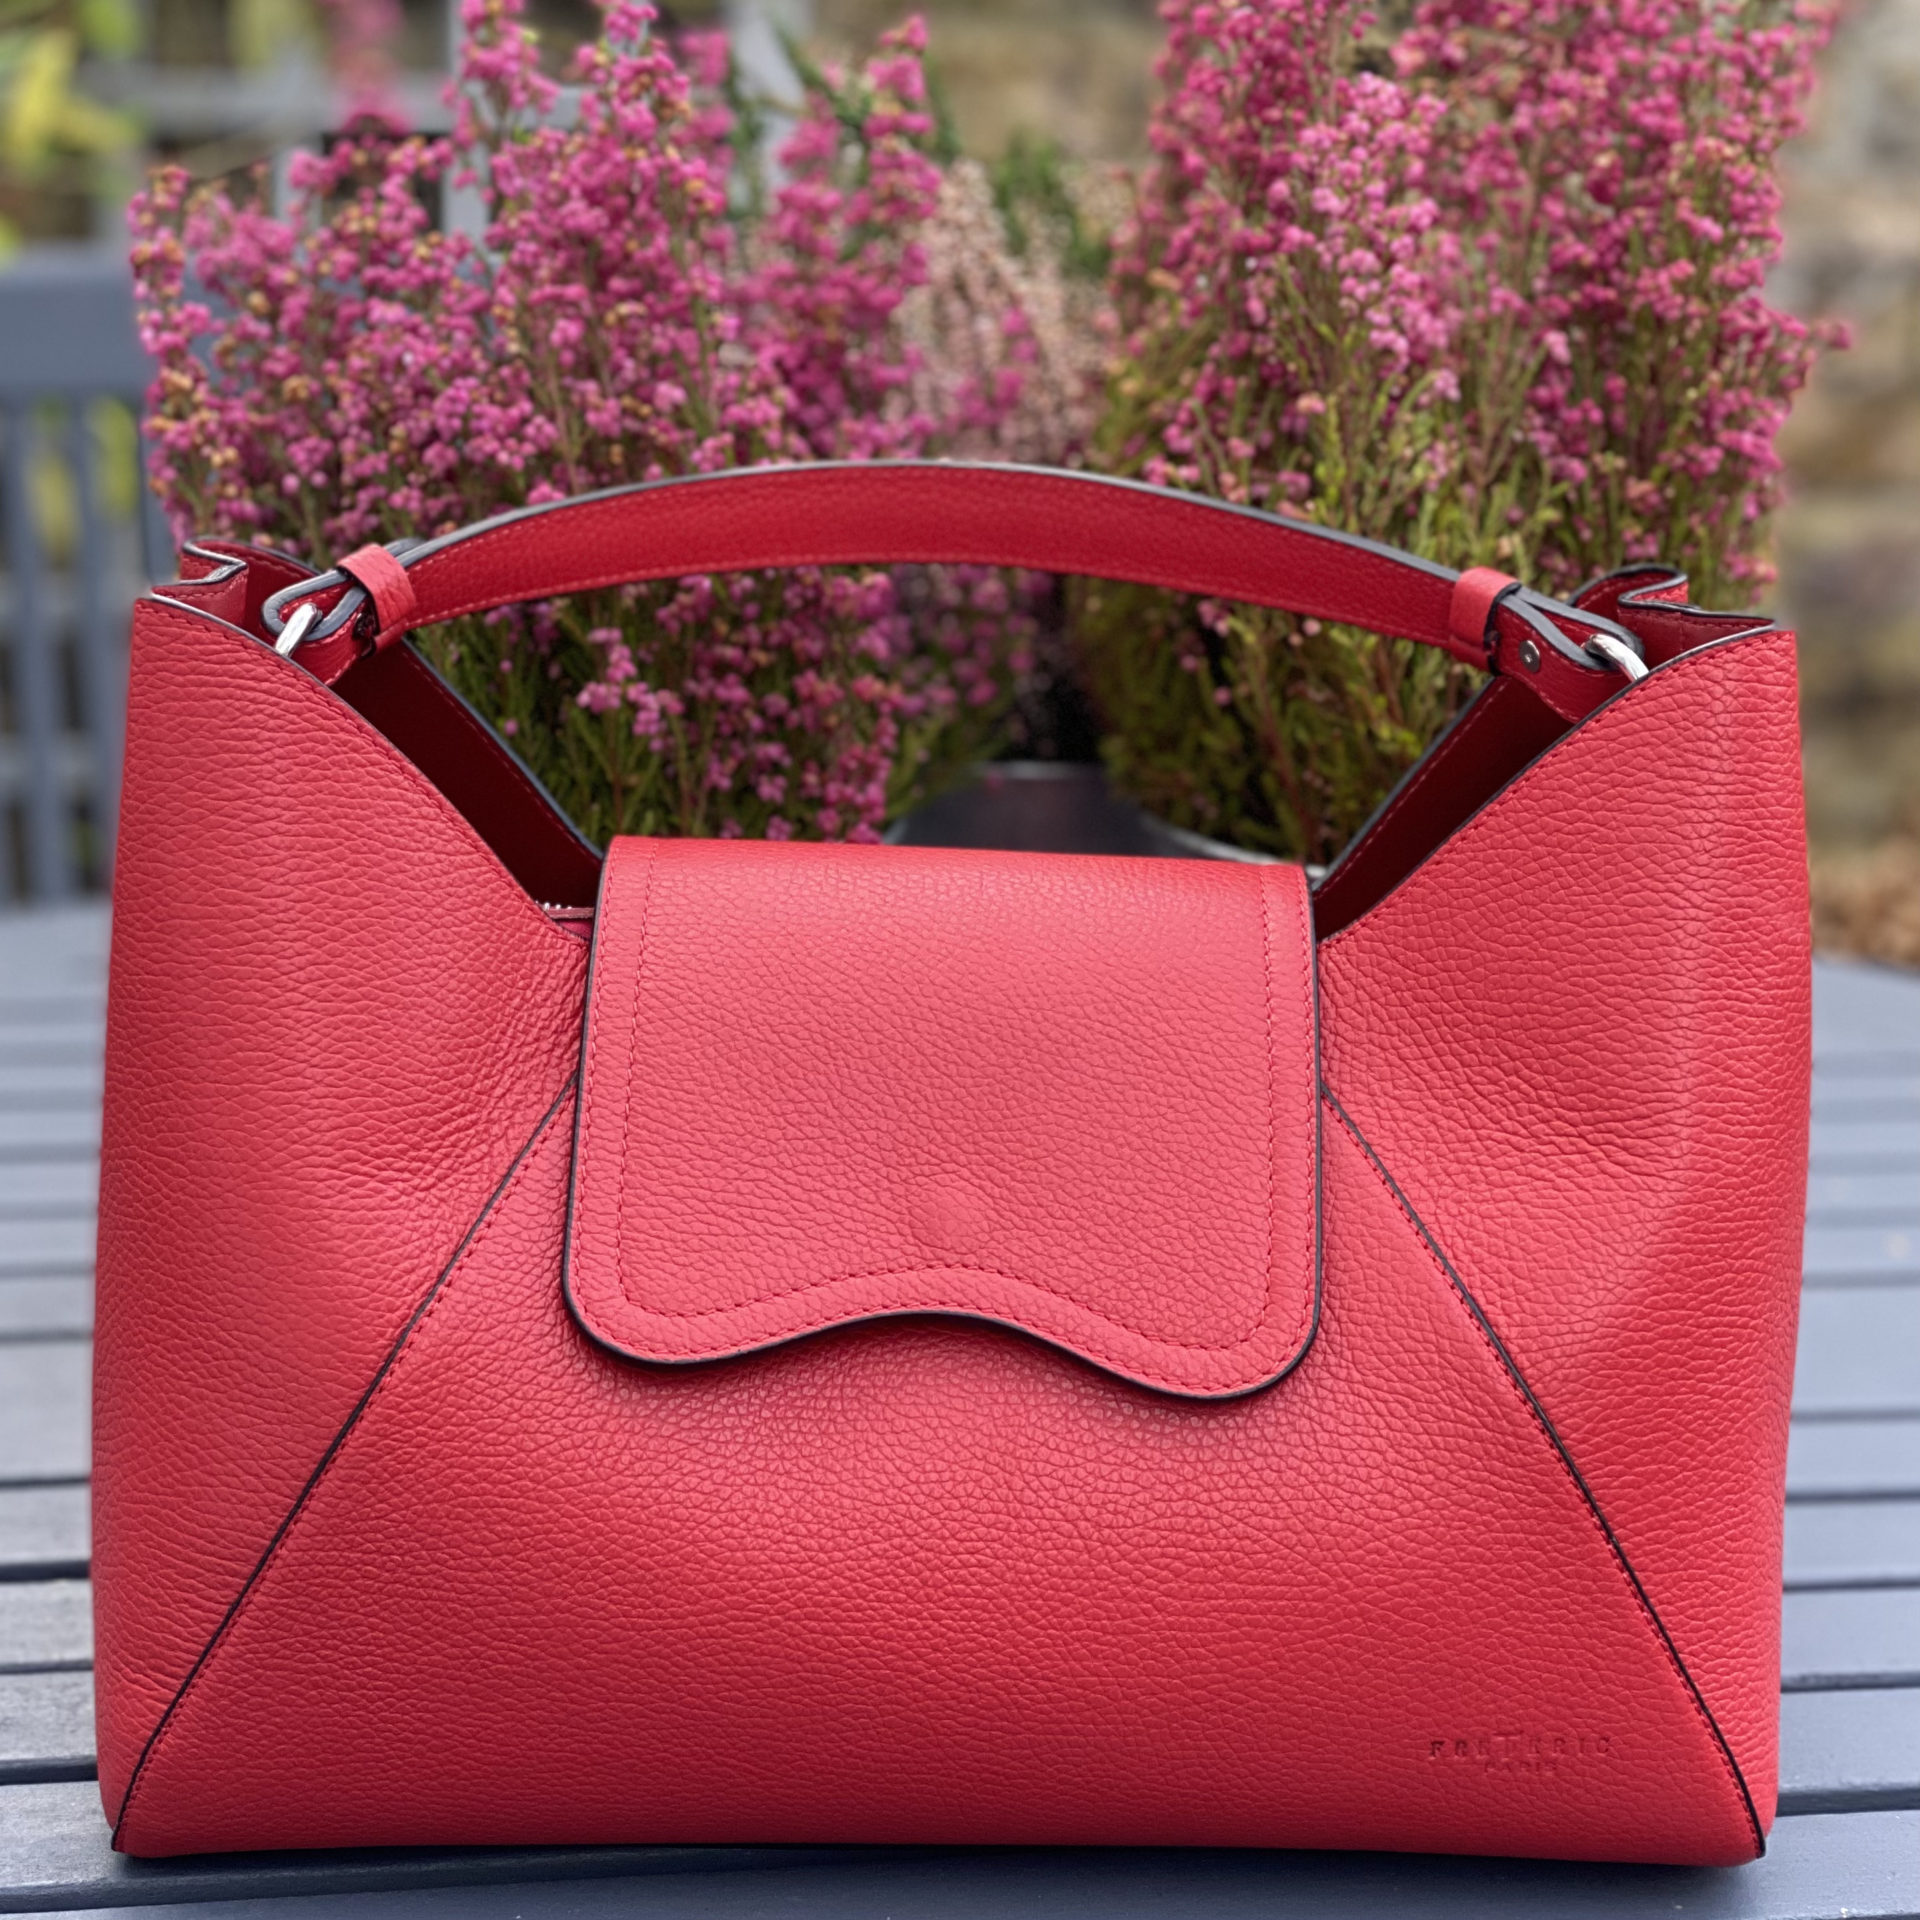 Red leather tote bag - Cornflower Blue - Accessories with Style